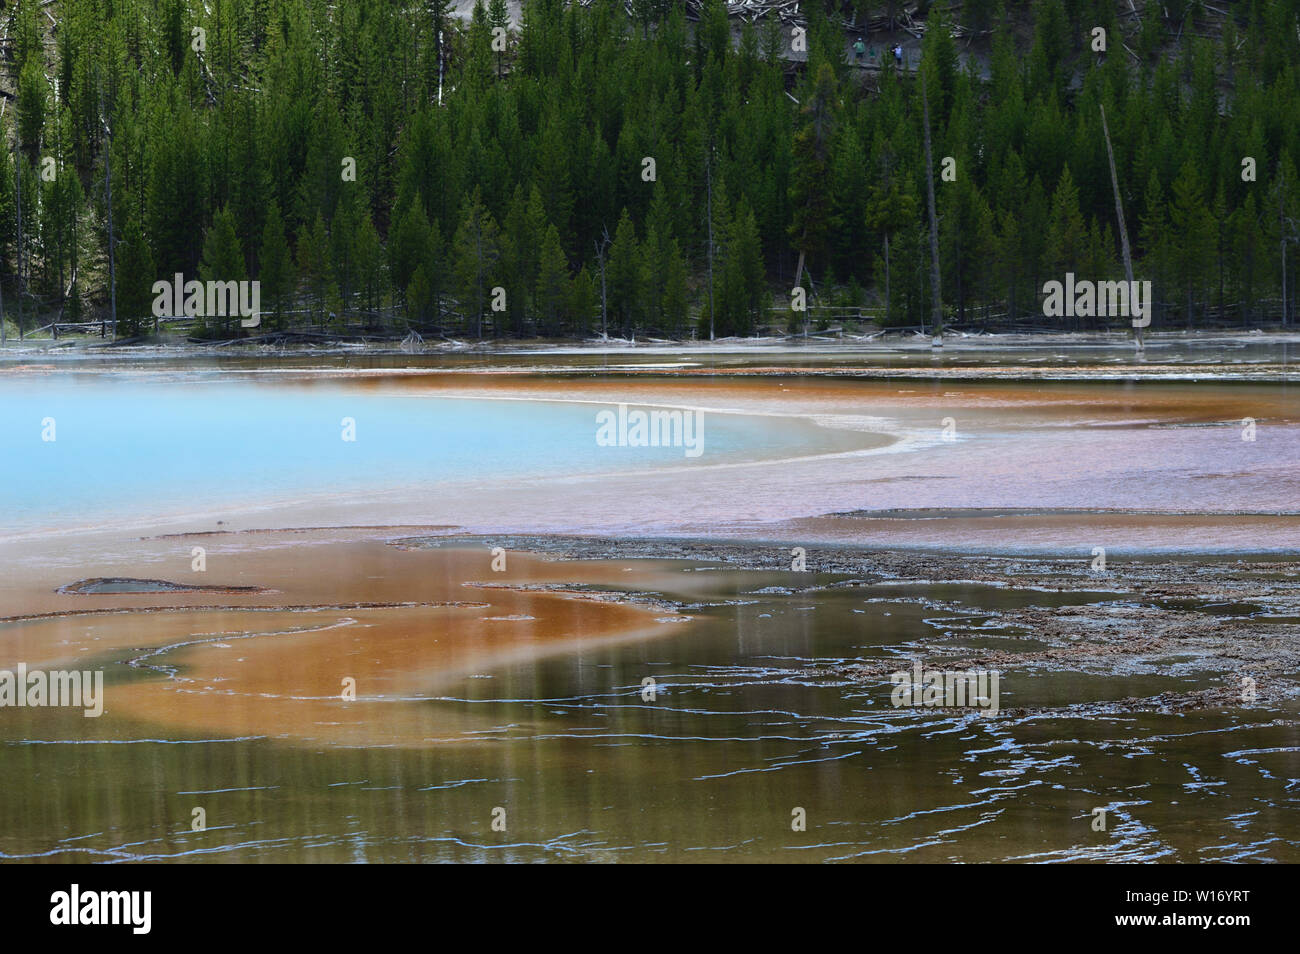 Colorful brown and blue hot spring thermal feature with green forest in background. Grand Prismatic, Yellowstone National Park. Stock Photo